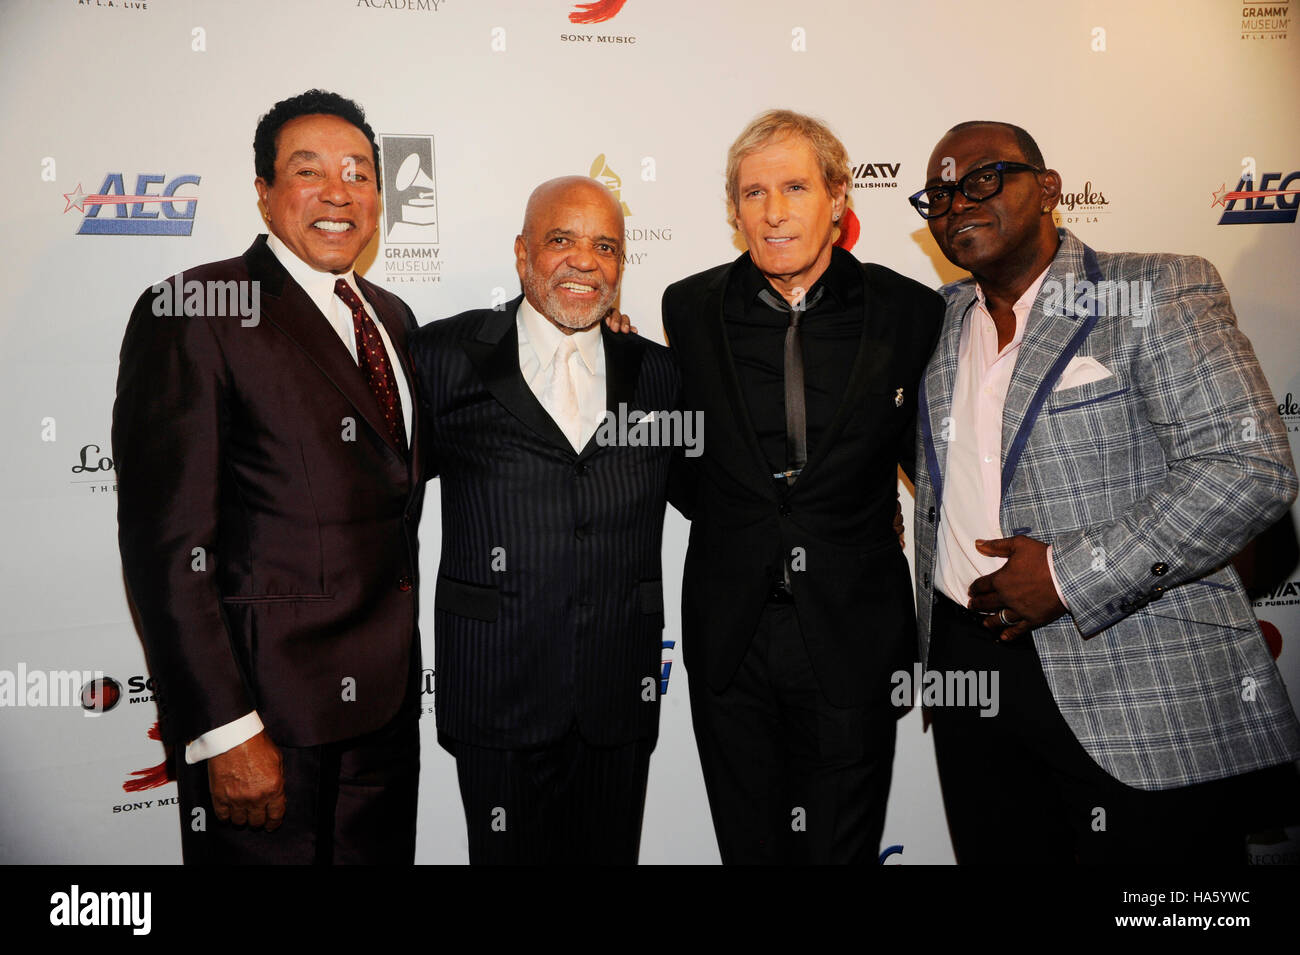 (L-R) GRAMMY winner Smokey Robinson, Motown founder Berry Gordy, Michael Bolton and Randy Jackson honored at the first-ever Architects of Sound Awards at the GRAMMY Museum on November 11, 2013 in Los Angeles, California. Stock Photo